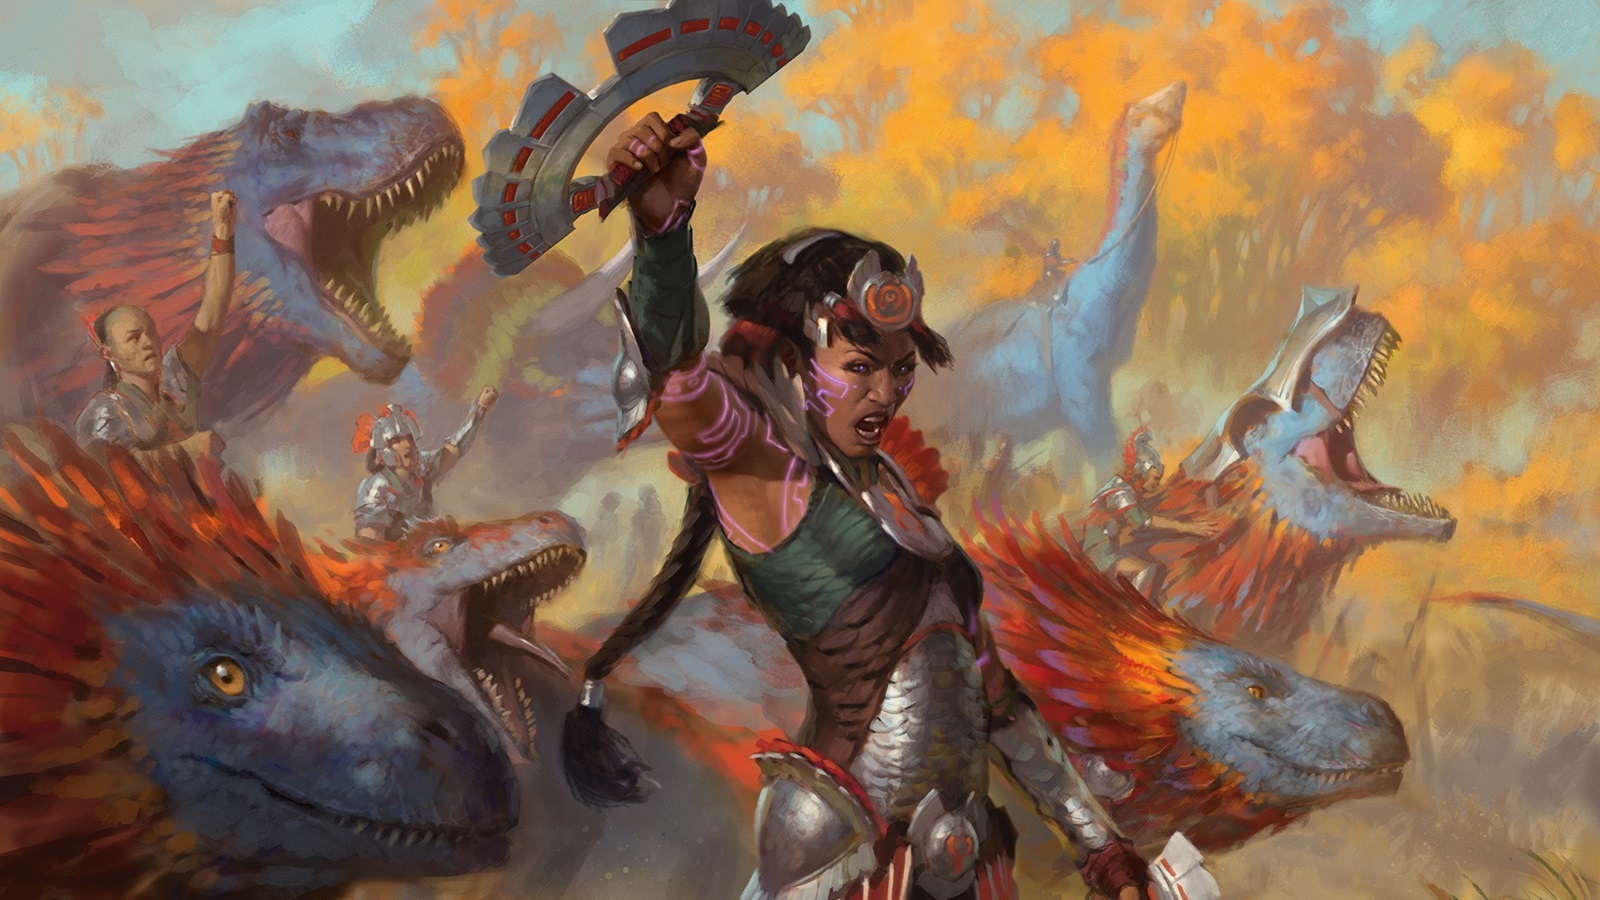 Magic: The Gathering” is officially the world's most complex game